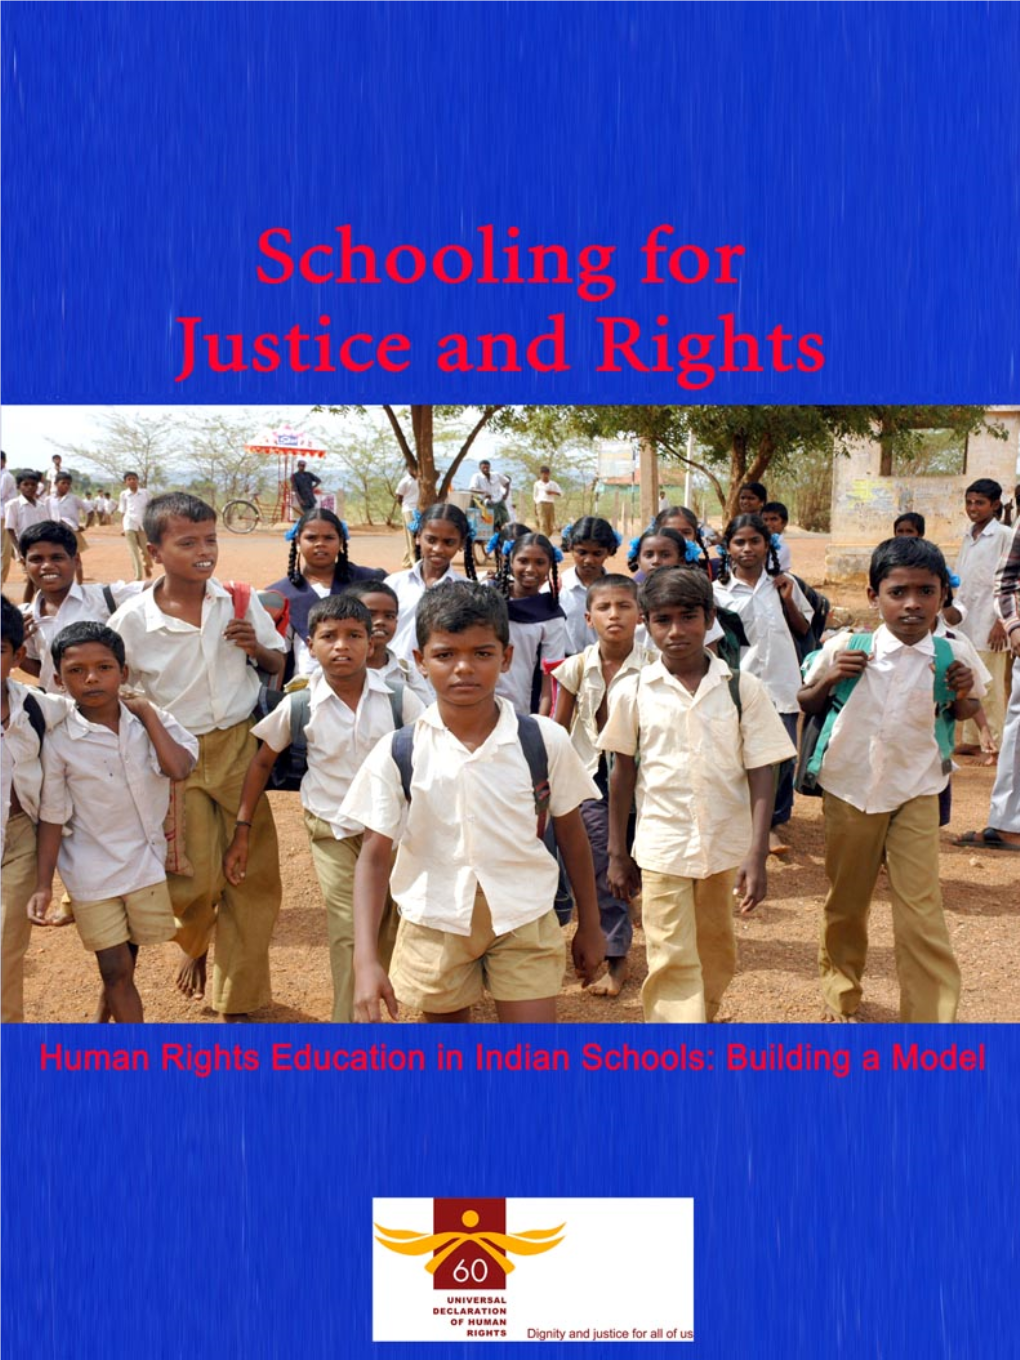 Schooling for Justice and Rights Human Rights Education in Schools in India - a Model